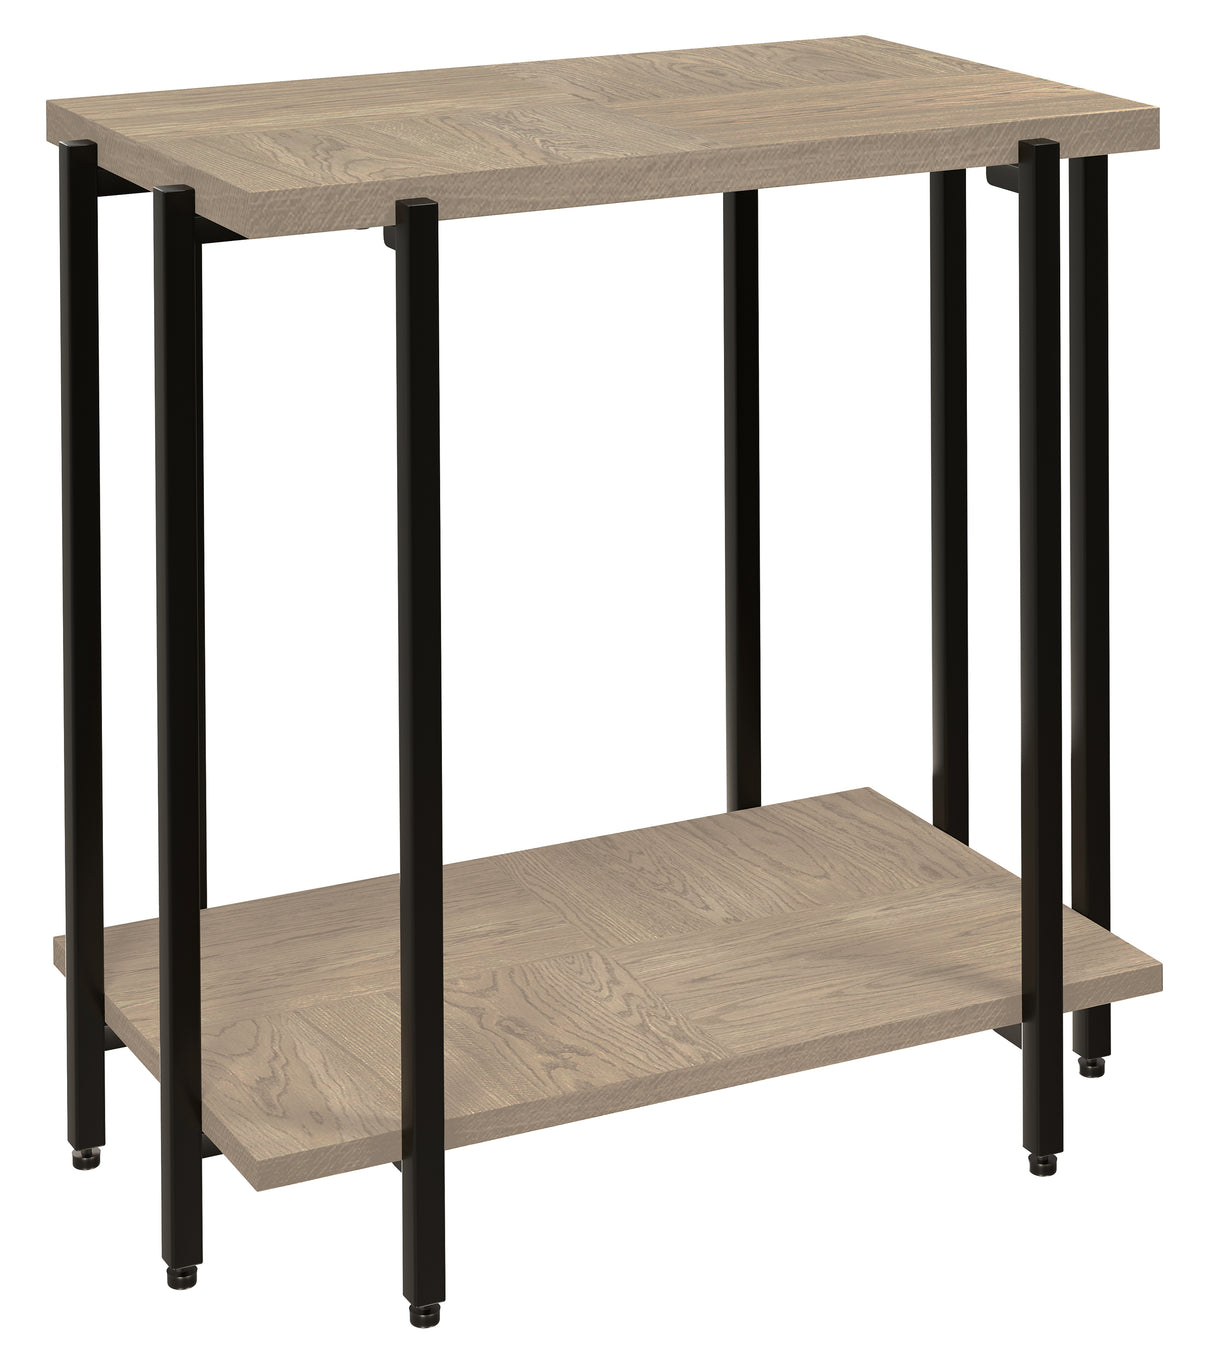 Hekman 25906 Mayfield 16.5in. x 26.5in. x 26in. End Table